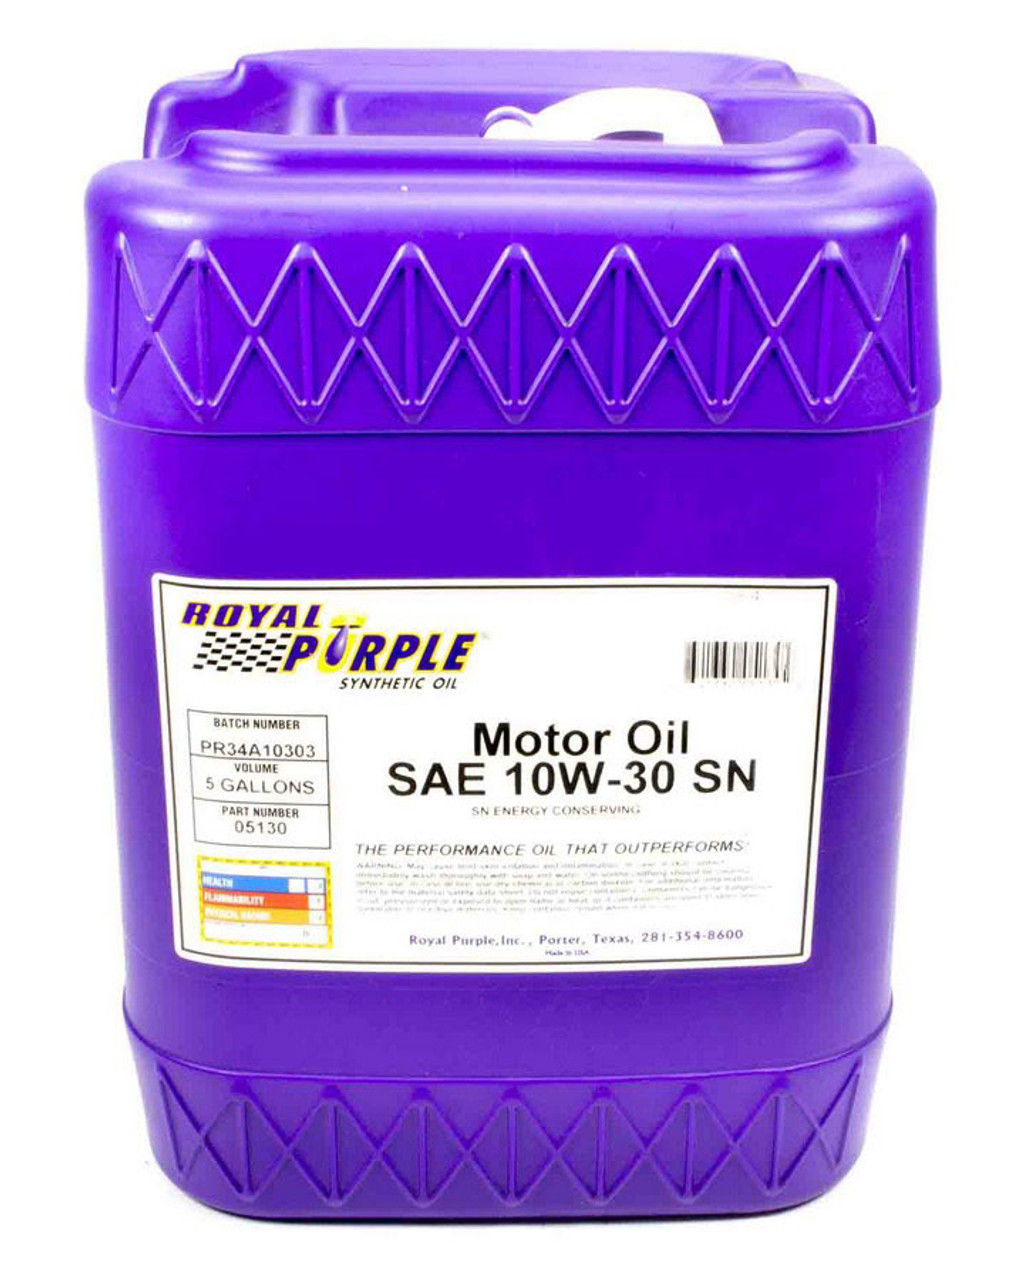 Synthetic Motor Oil 5Gal 10W30 ROY05130